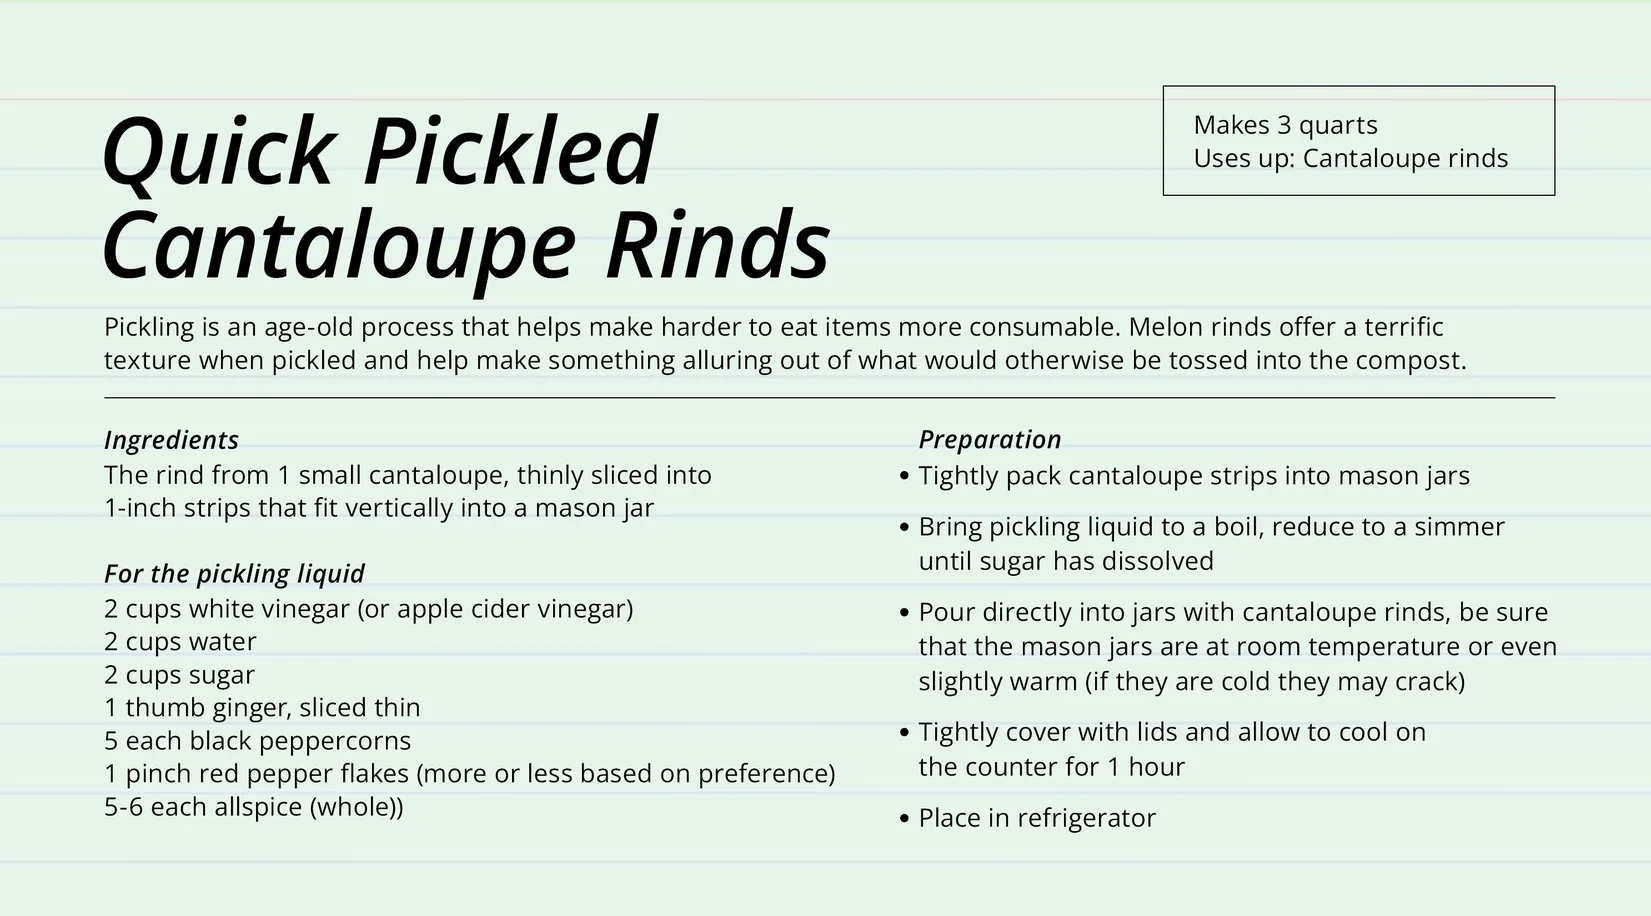 Image of recipe card of quick pickled cantaloupe rinds